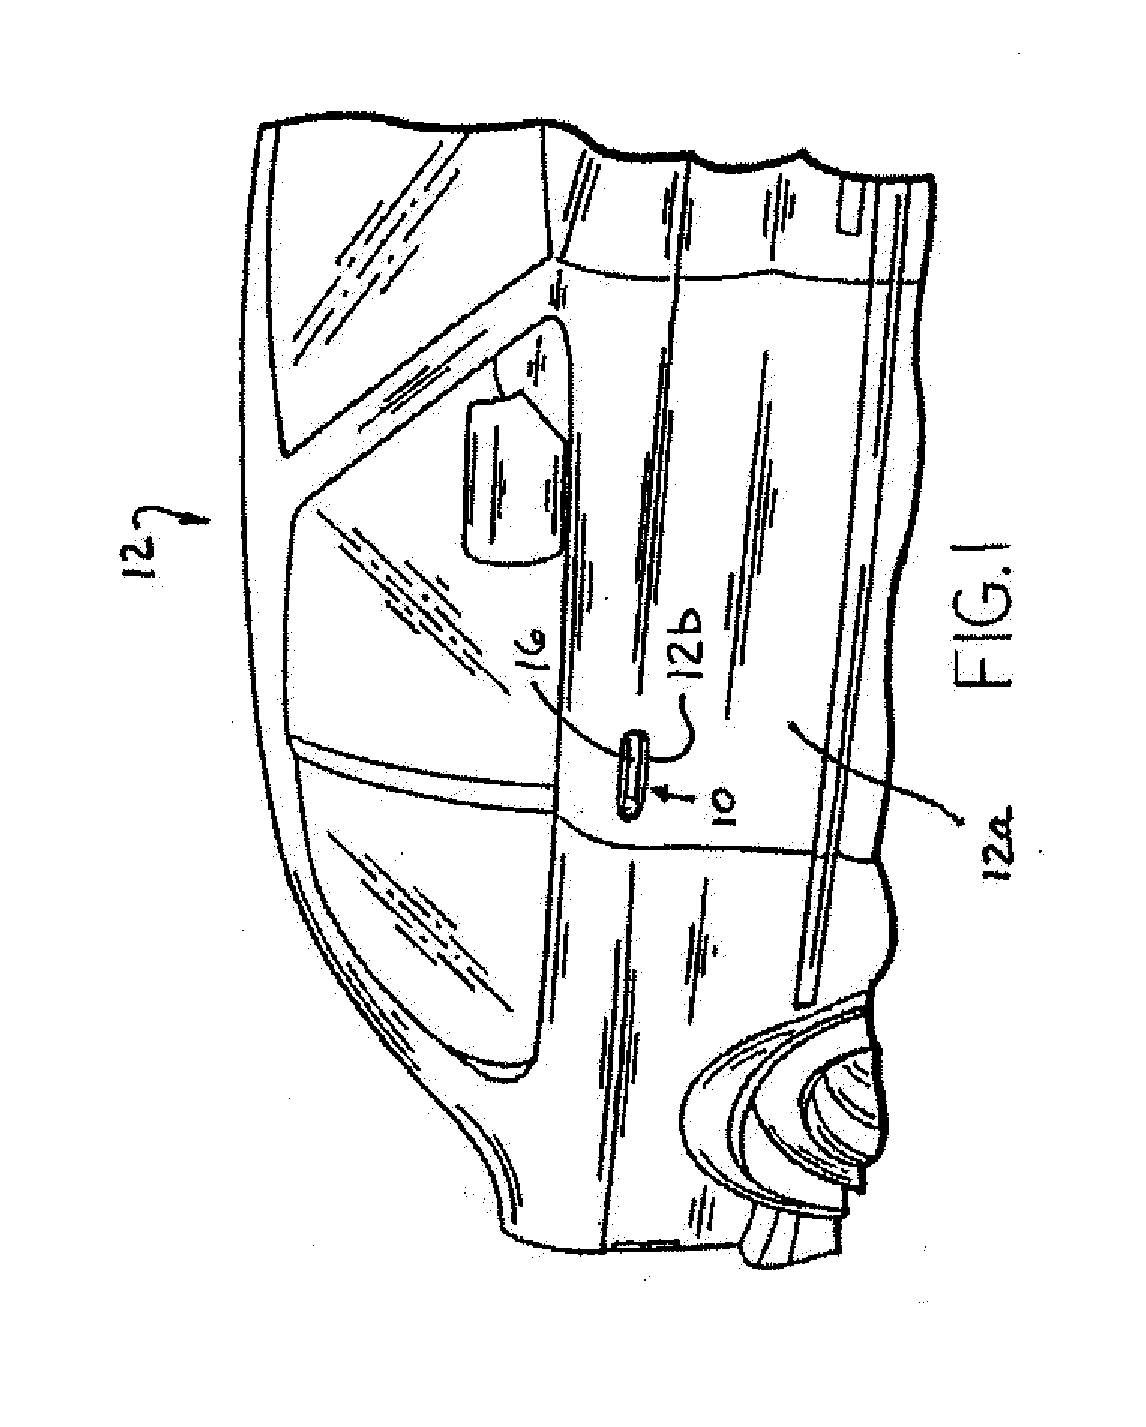 Vehicle handle with control circuitry